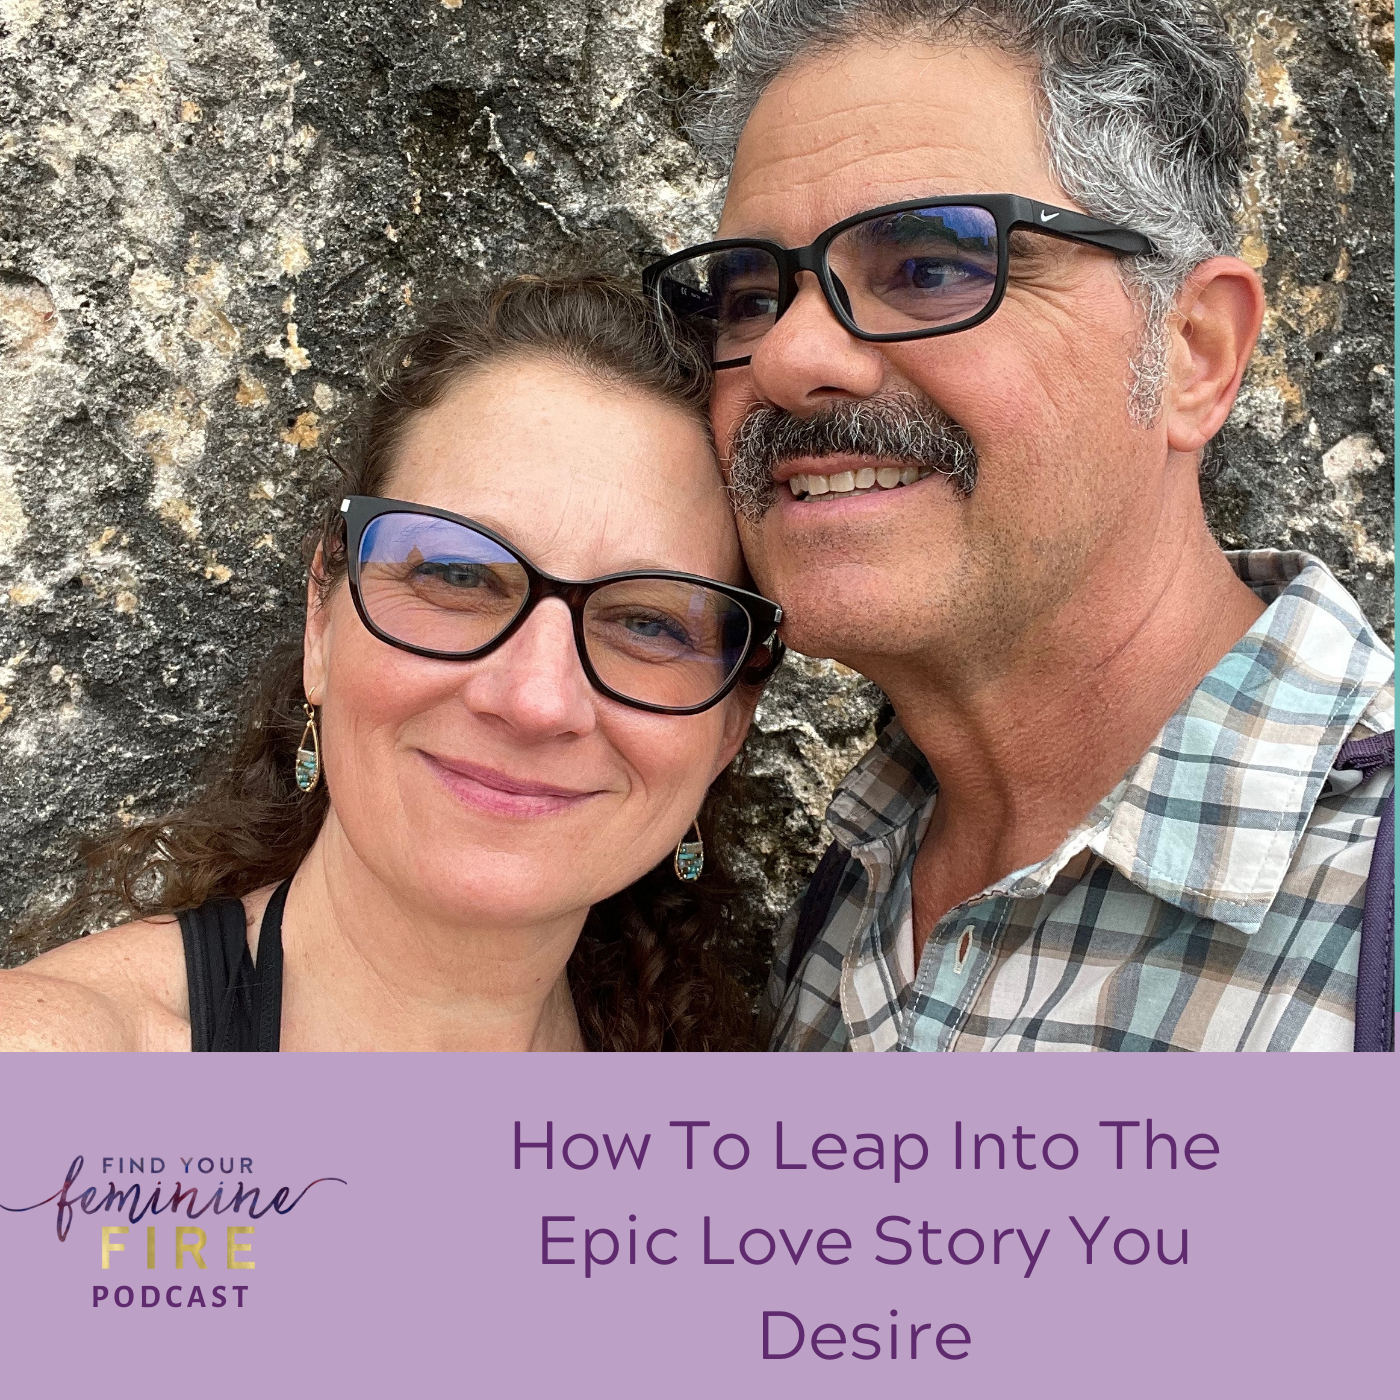 Leaping Forward Into The Epic Love Story You Desire